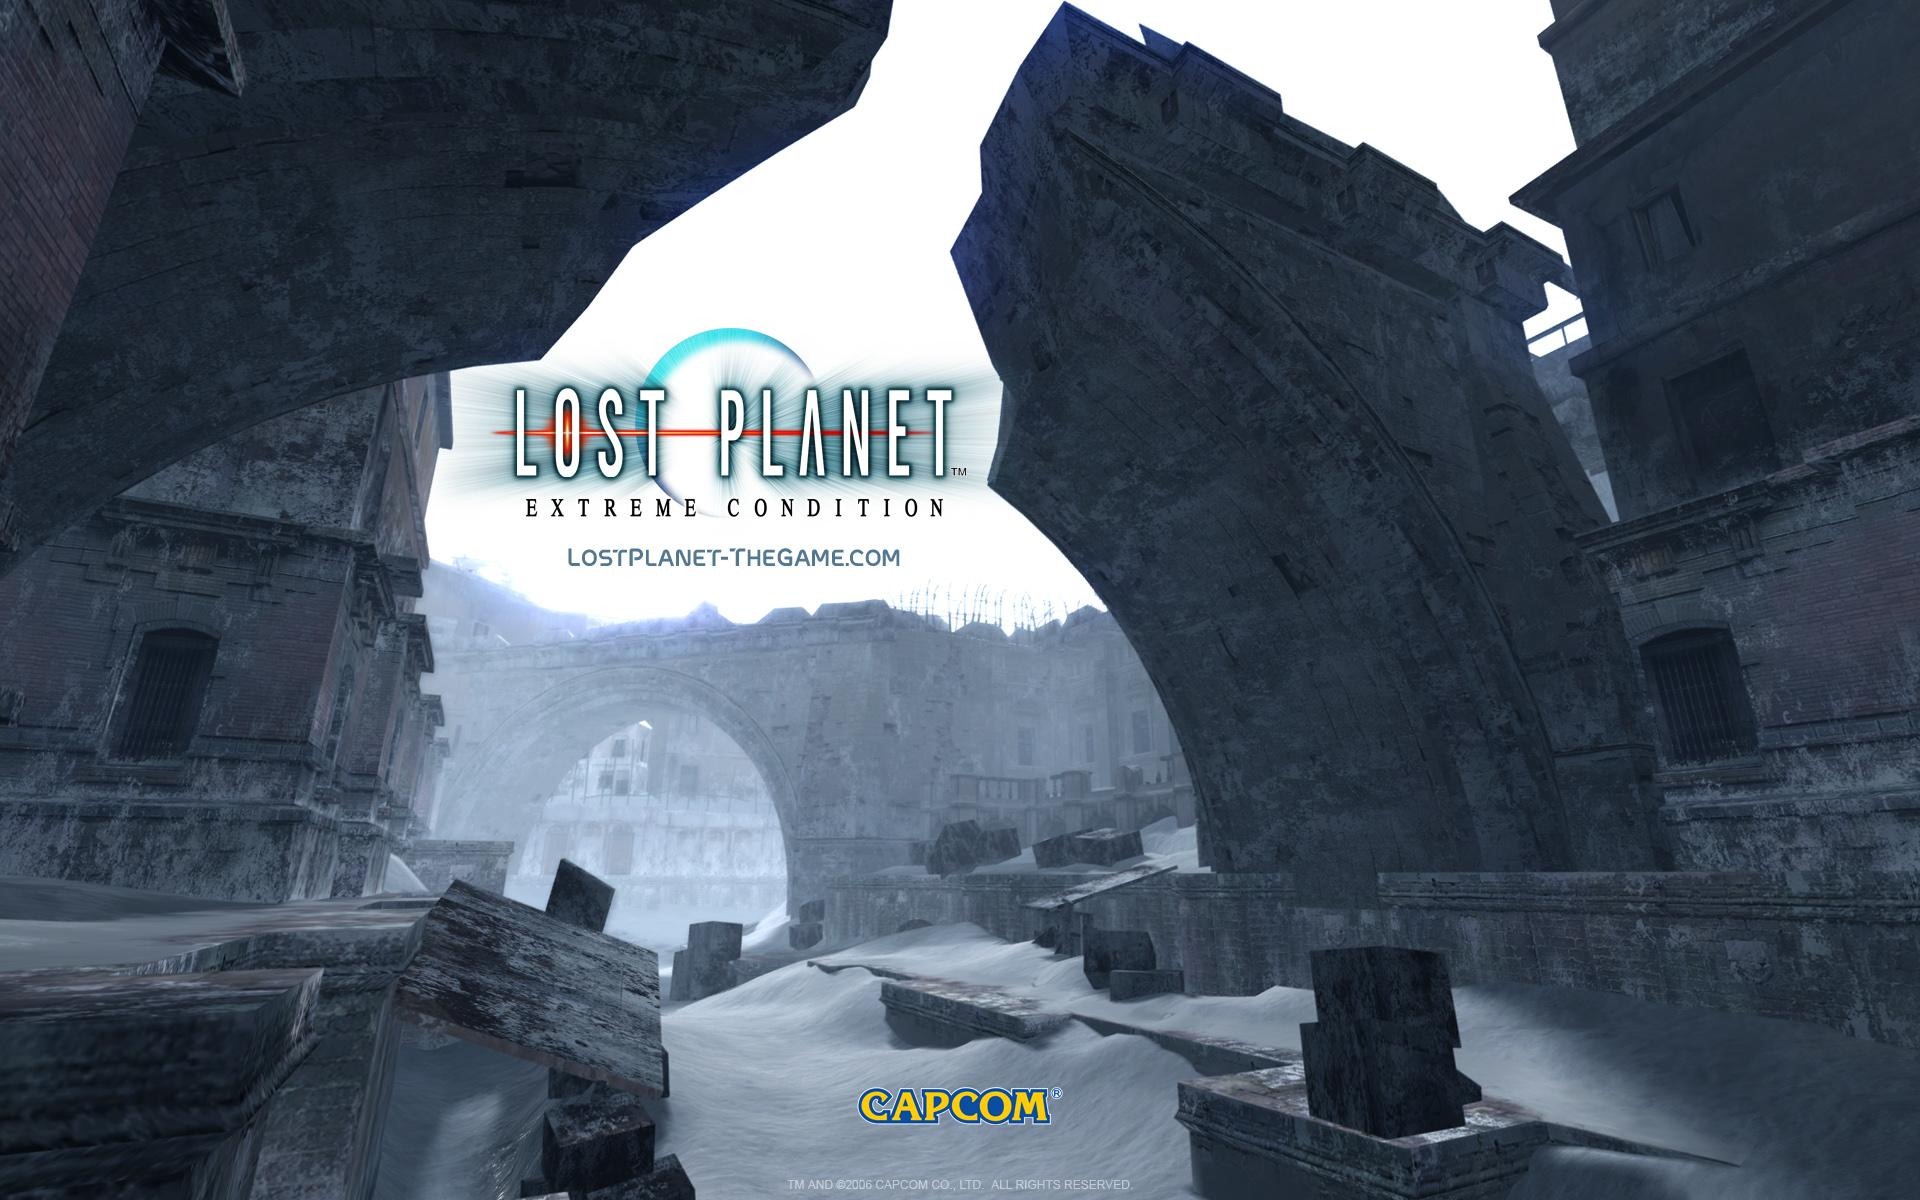 Lost Planet: Extreme Condition HD tapety na plochu #15 - 1920x1200